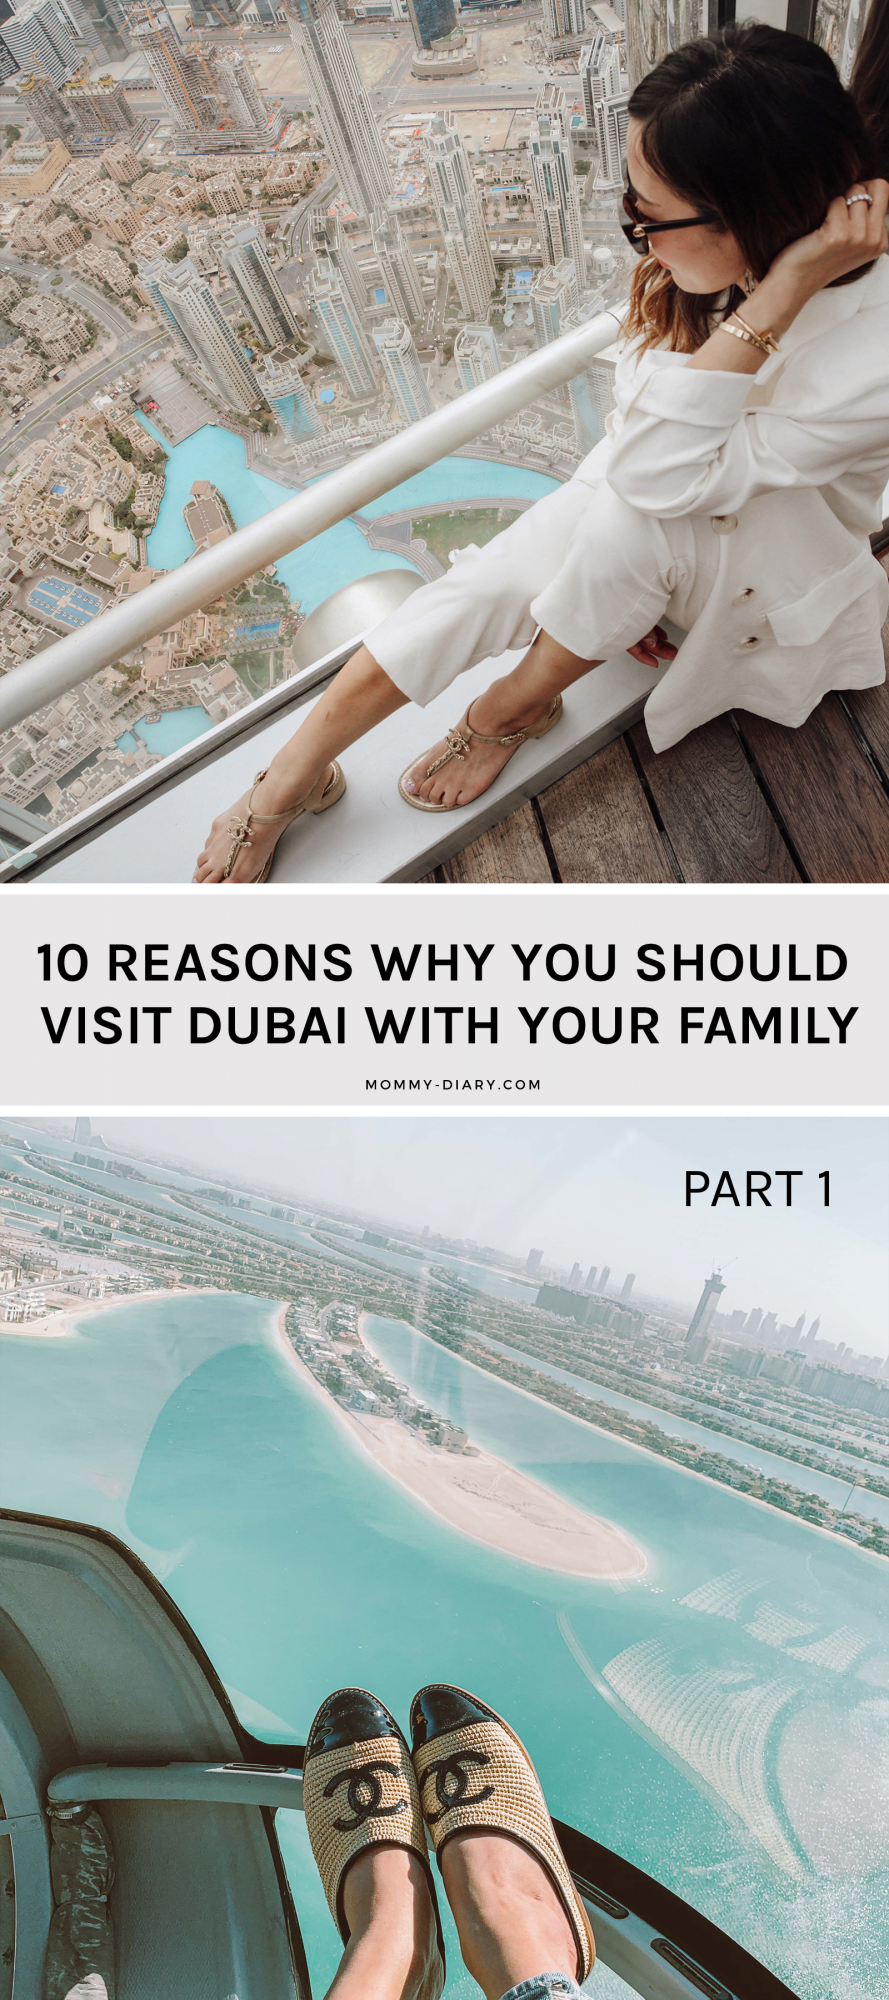 10-reasons-why-you-should-visit-dubai-with-your-family-pinterest